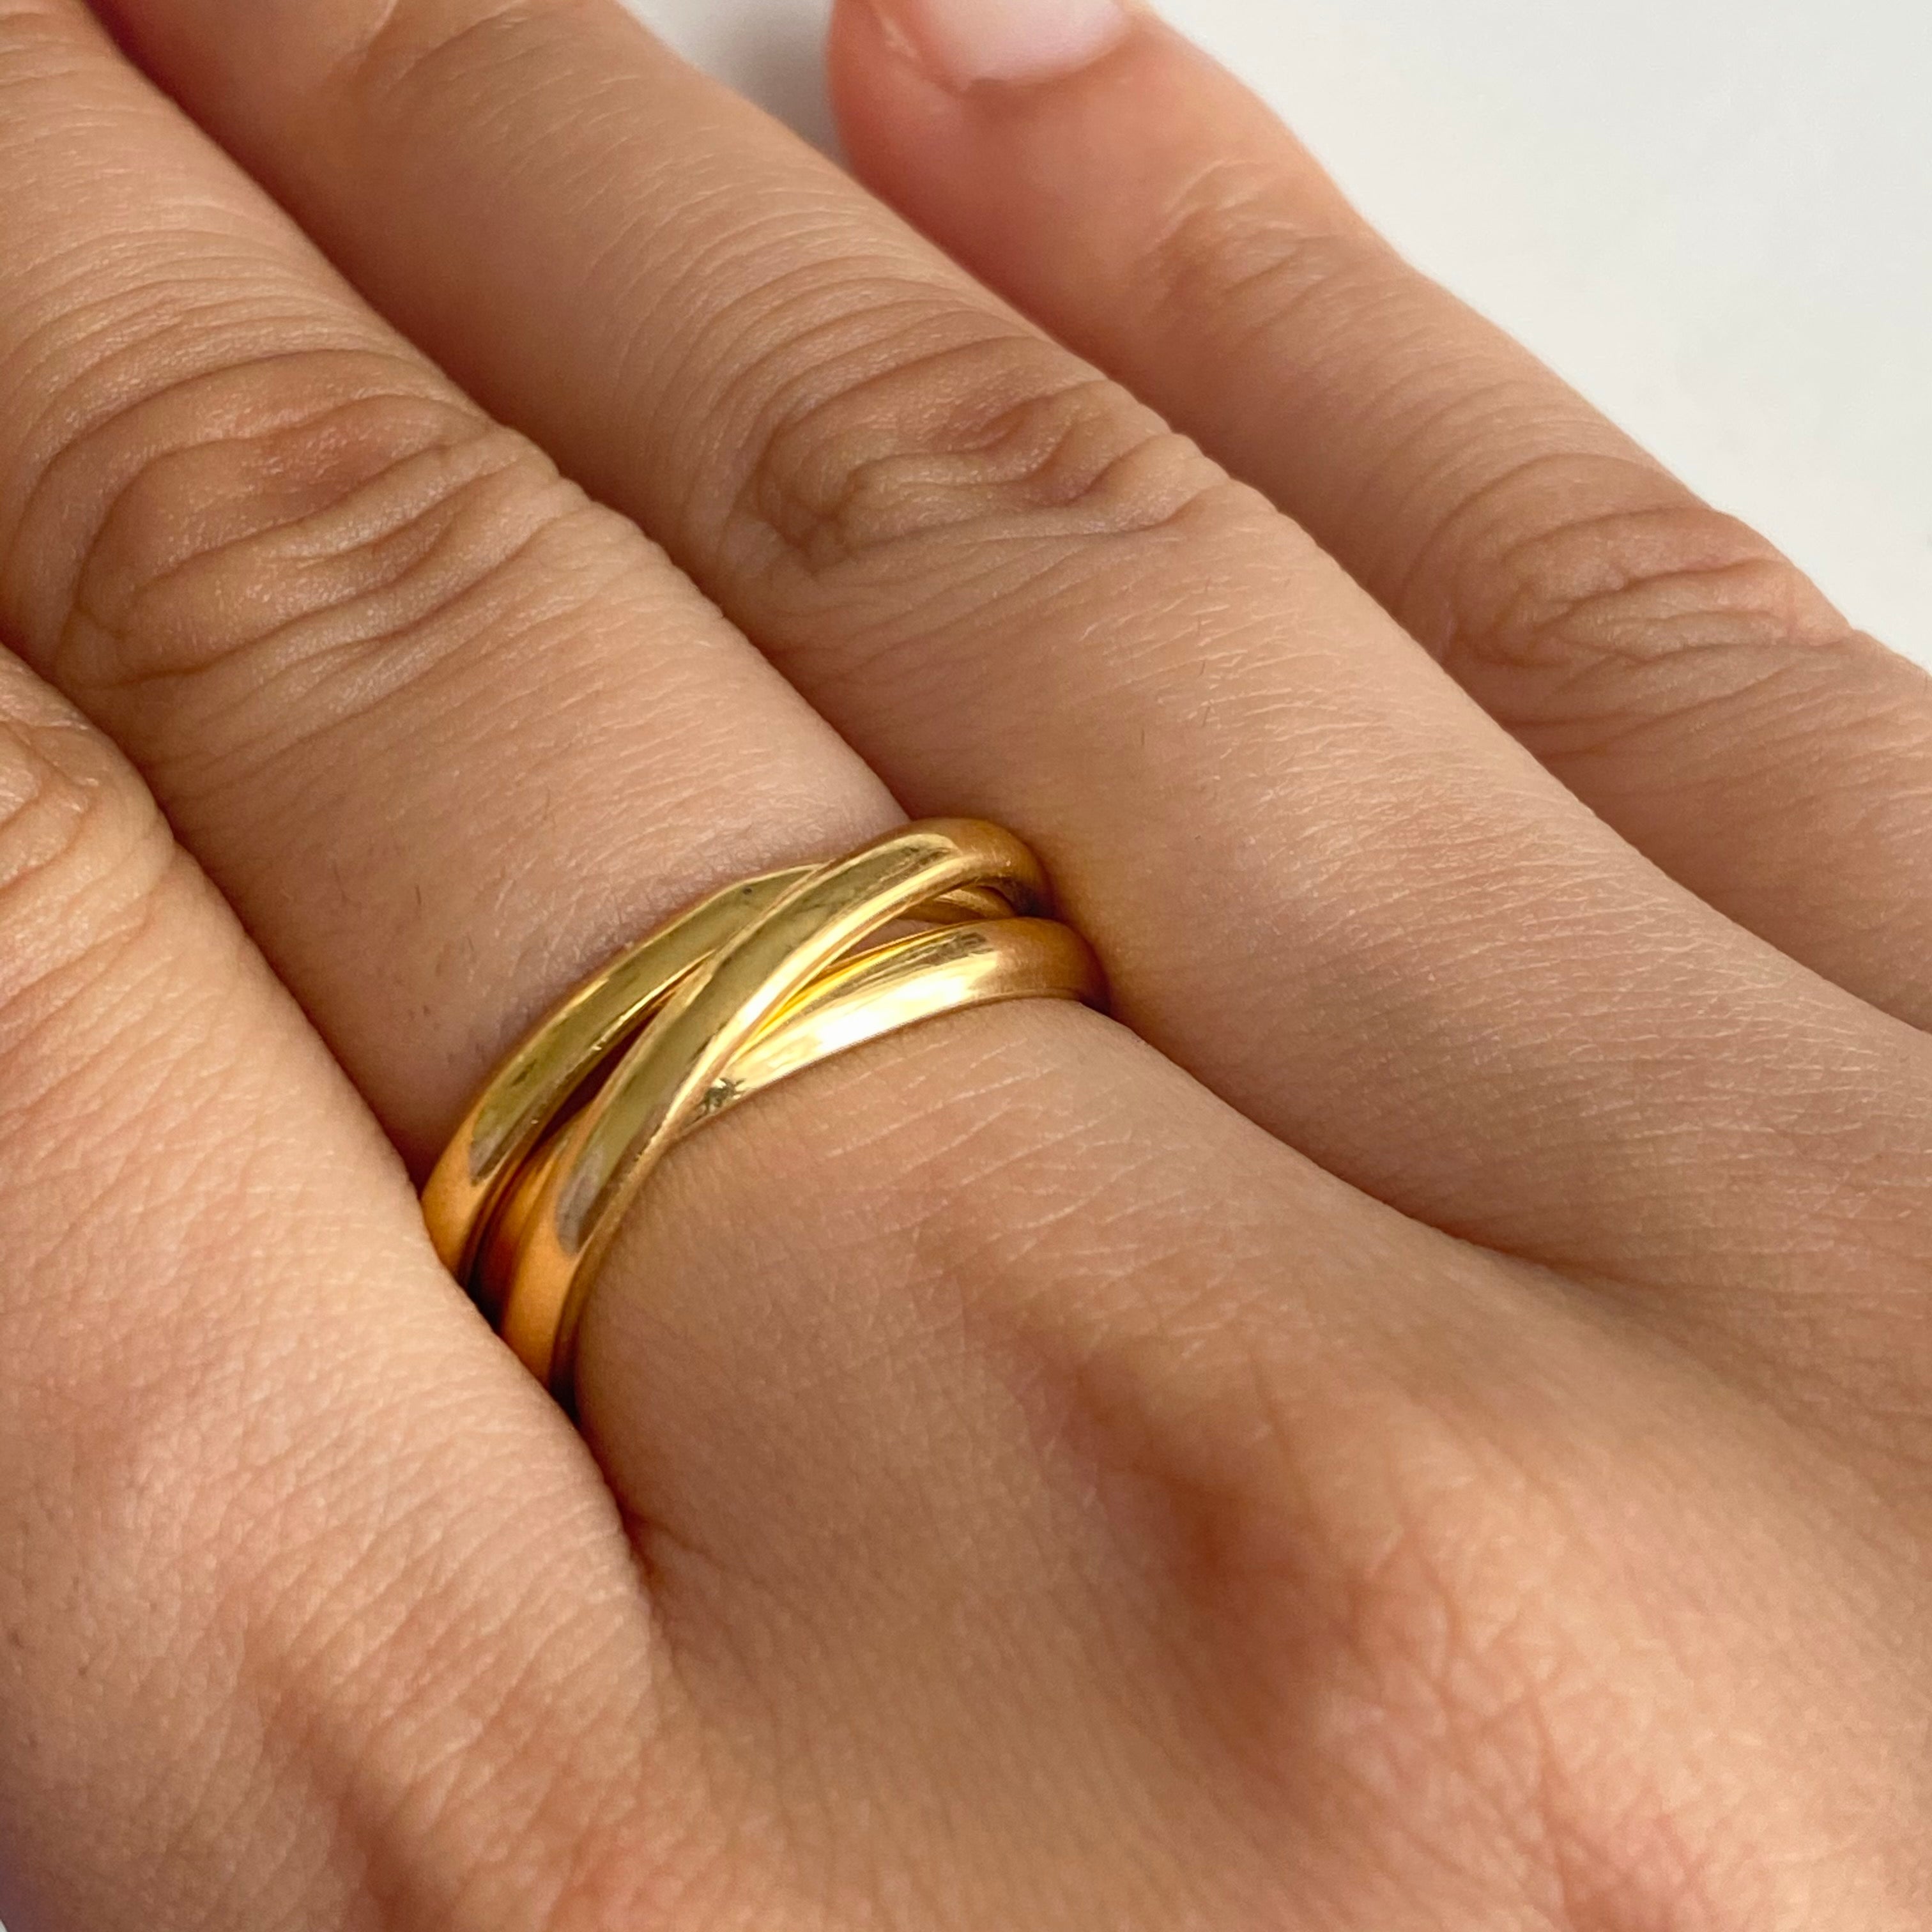 Intertwined Gold Plated Sterling Silver Ring - 3 Bands